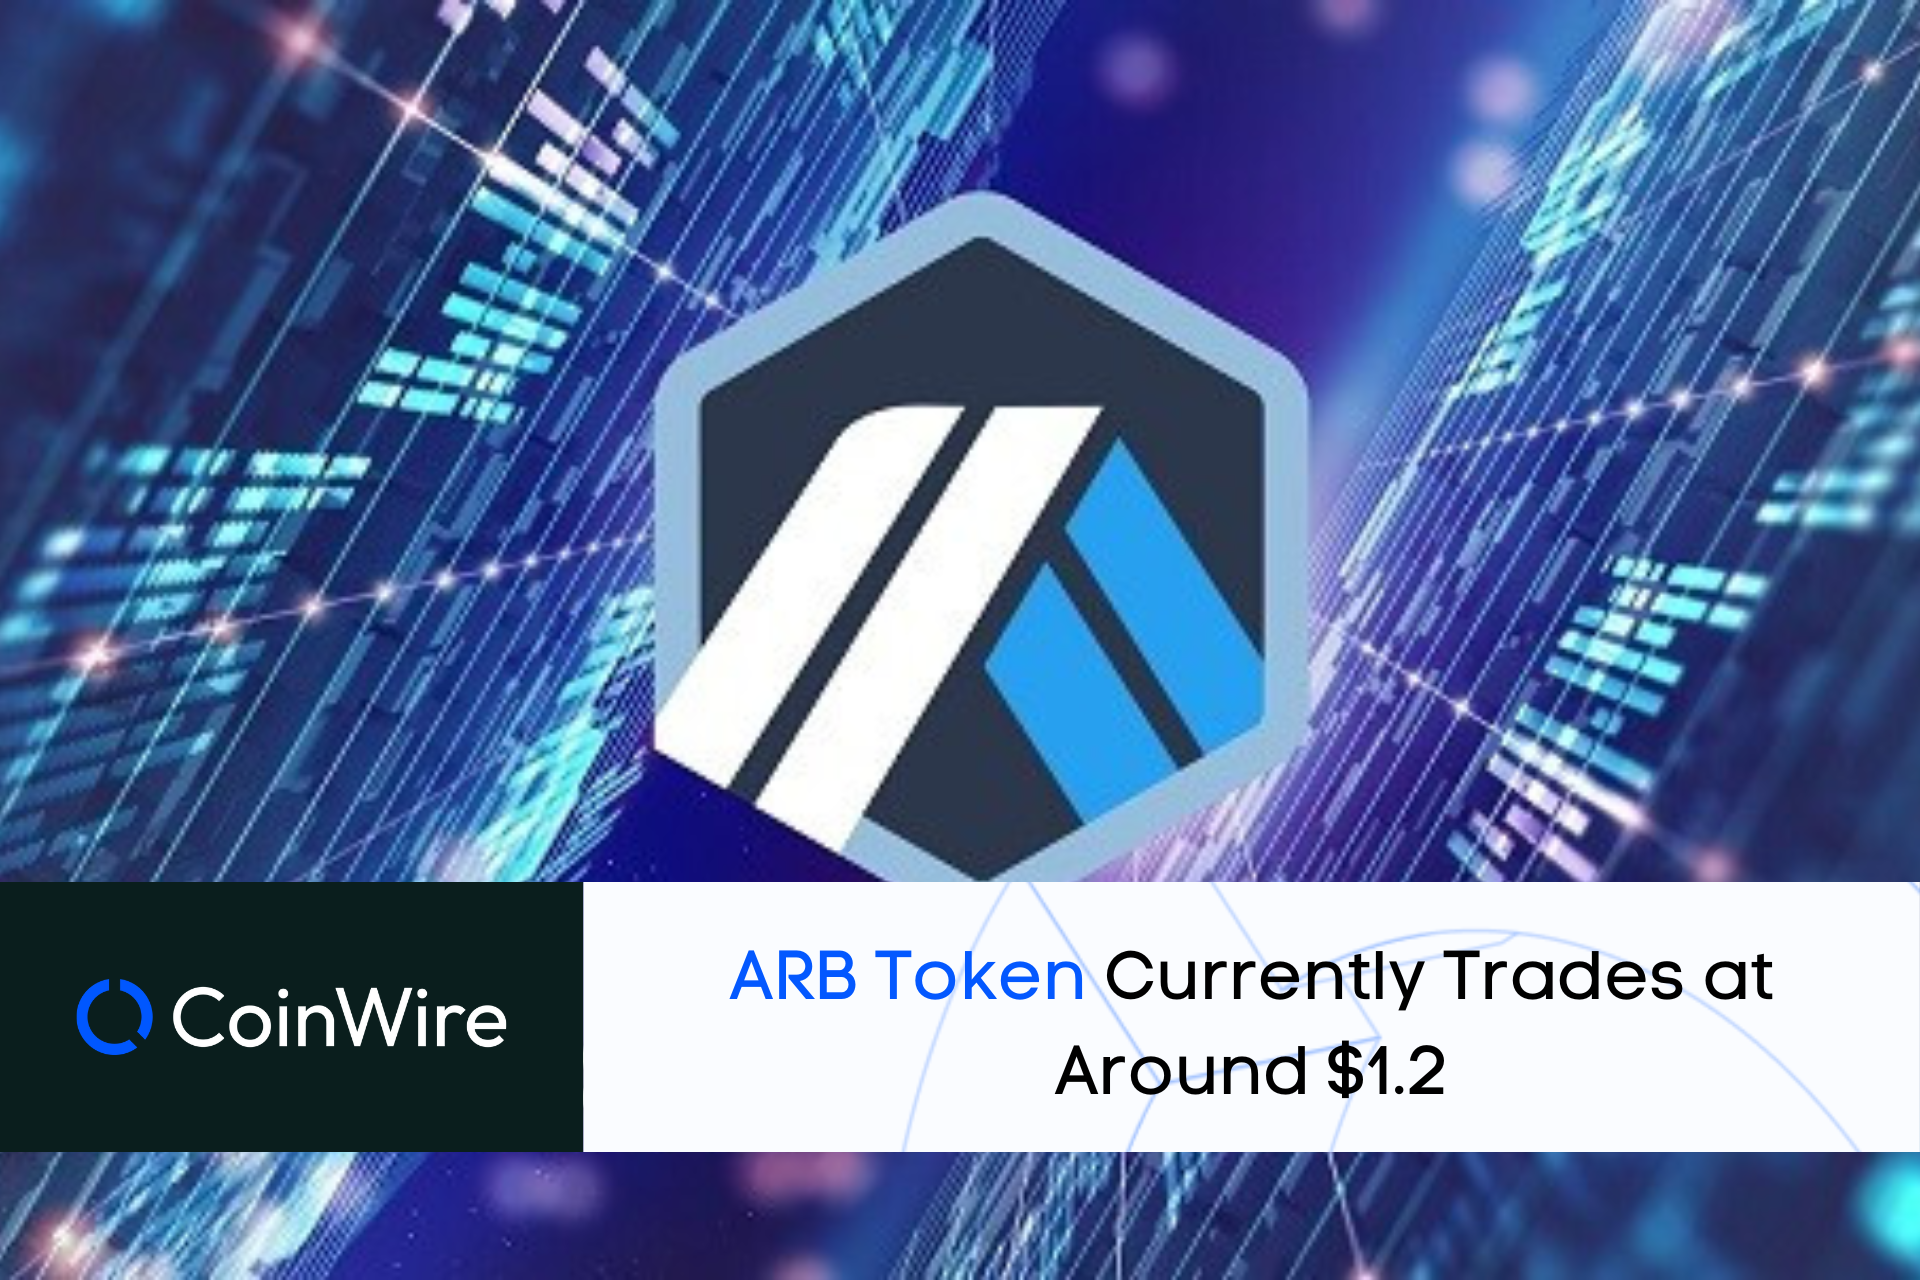 Arb Token Currently Trades At Around $1.2